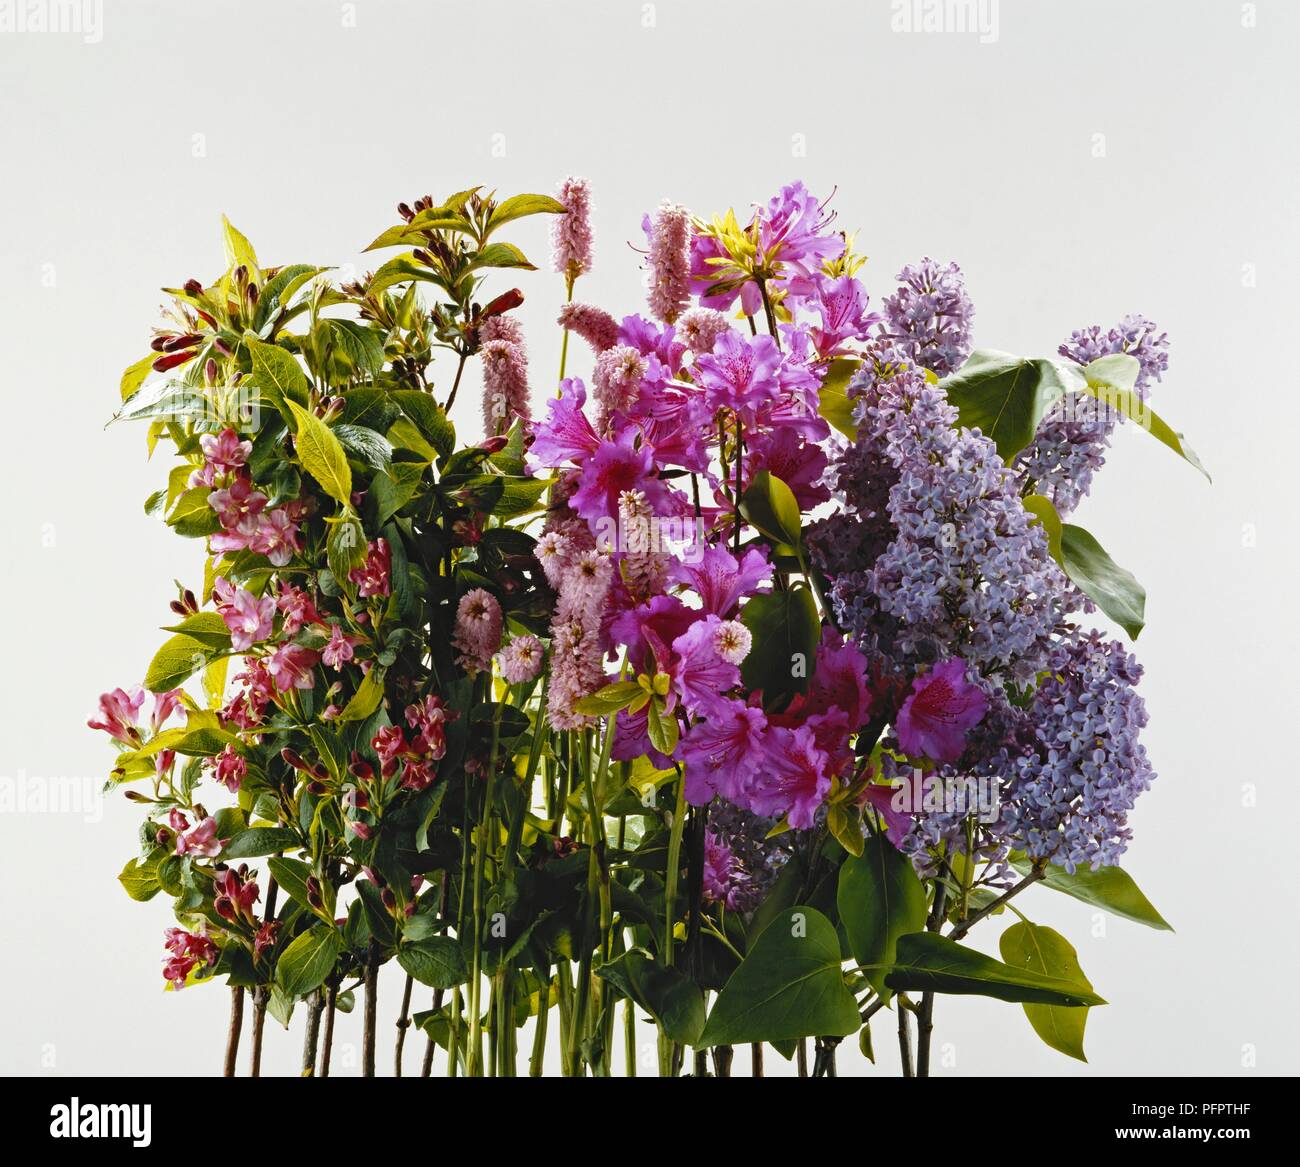 Display of pink, purple and blue flowers from Weigela florida, Polygonum bistorta 'Superbum' (Snakeweed bistort), Syringa 'Esther Staley' (Lilac) and Rhododendron 'Purple Triumph' (Hybrid azalea) Stock Photo